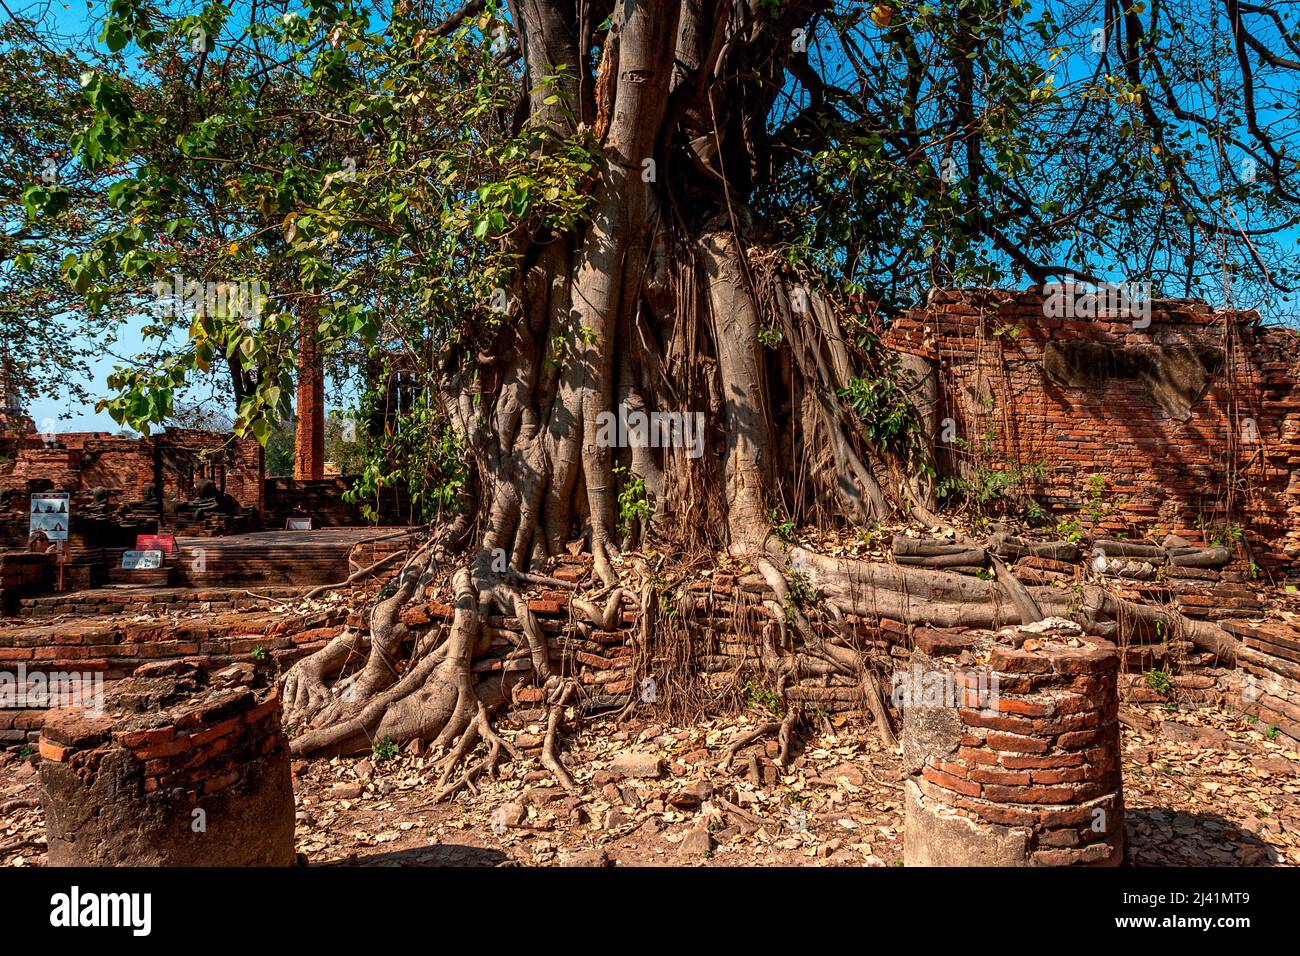 View from the back of the tree with the Buddha Face in Thailand. Stock Photo